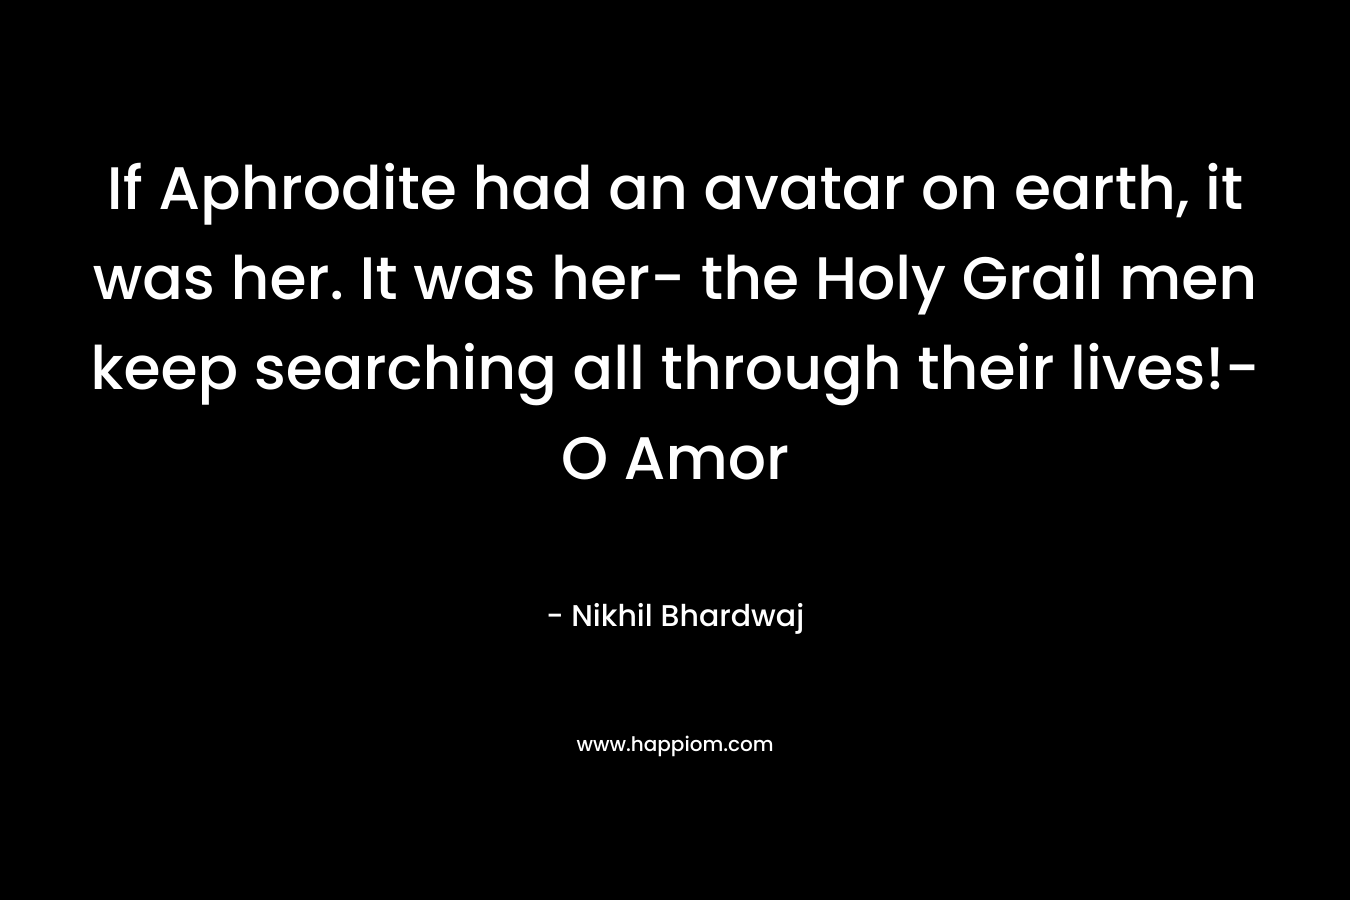 If Aphrodite had an avatar on earth, it was her. It was her- the Holy Grail men keep searching all through their lives!- O Amor